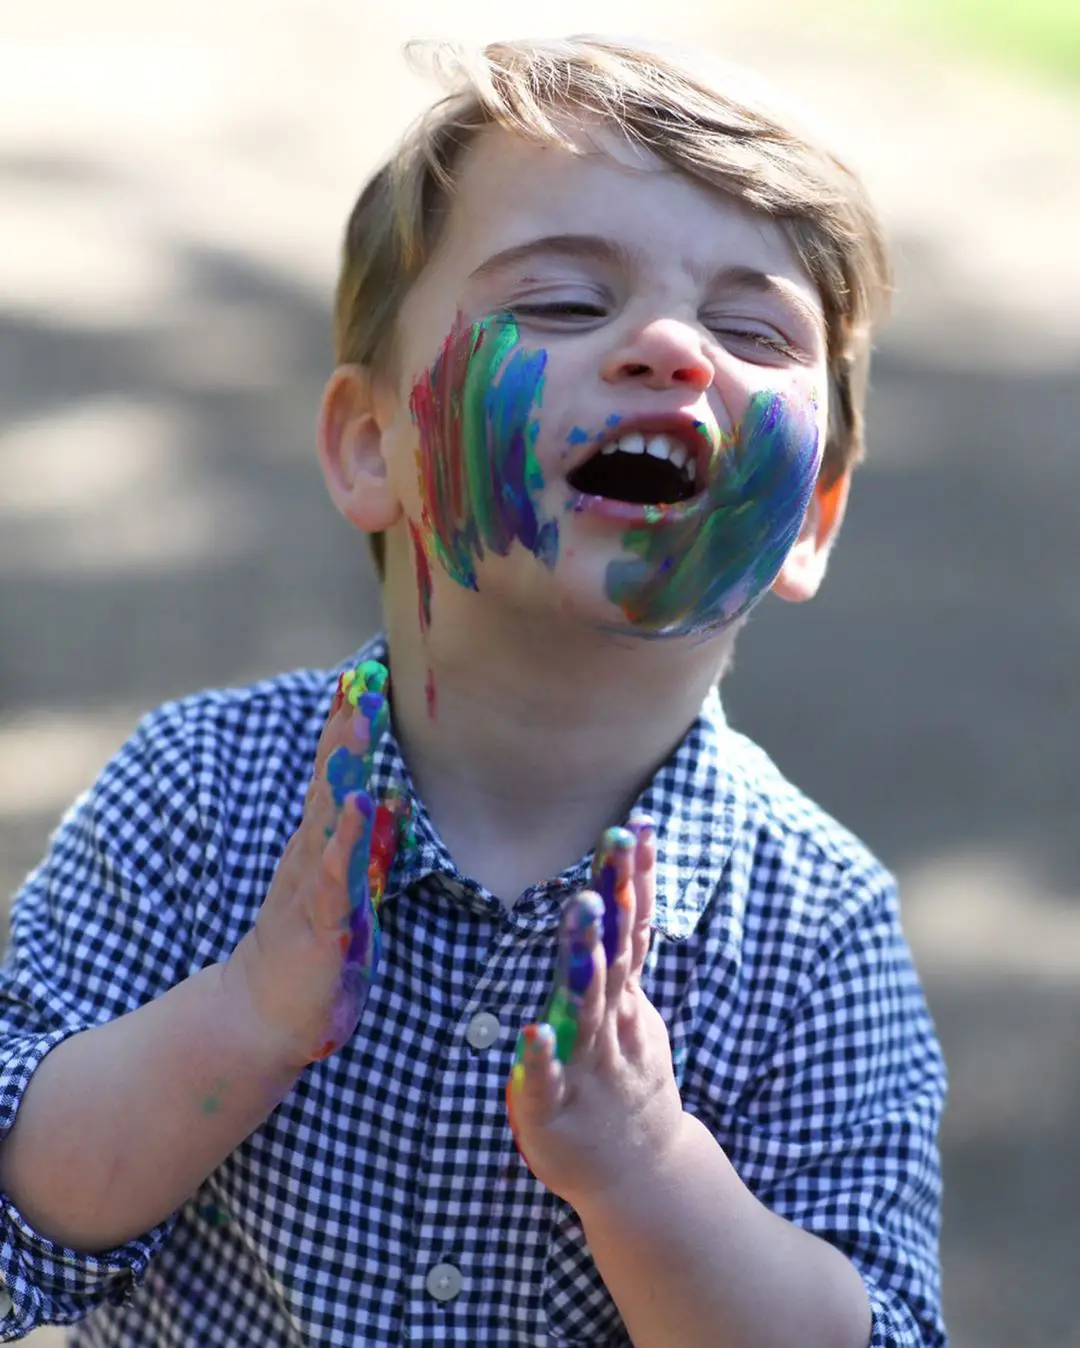 Prince Louis of Cambridge with rainbow paint on his face in his birthday pictures